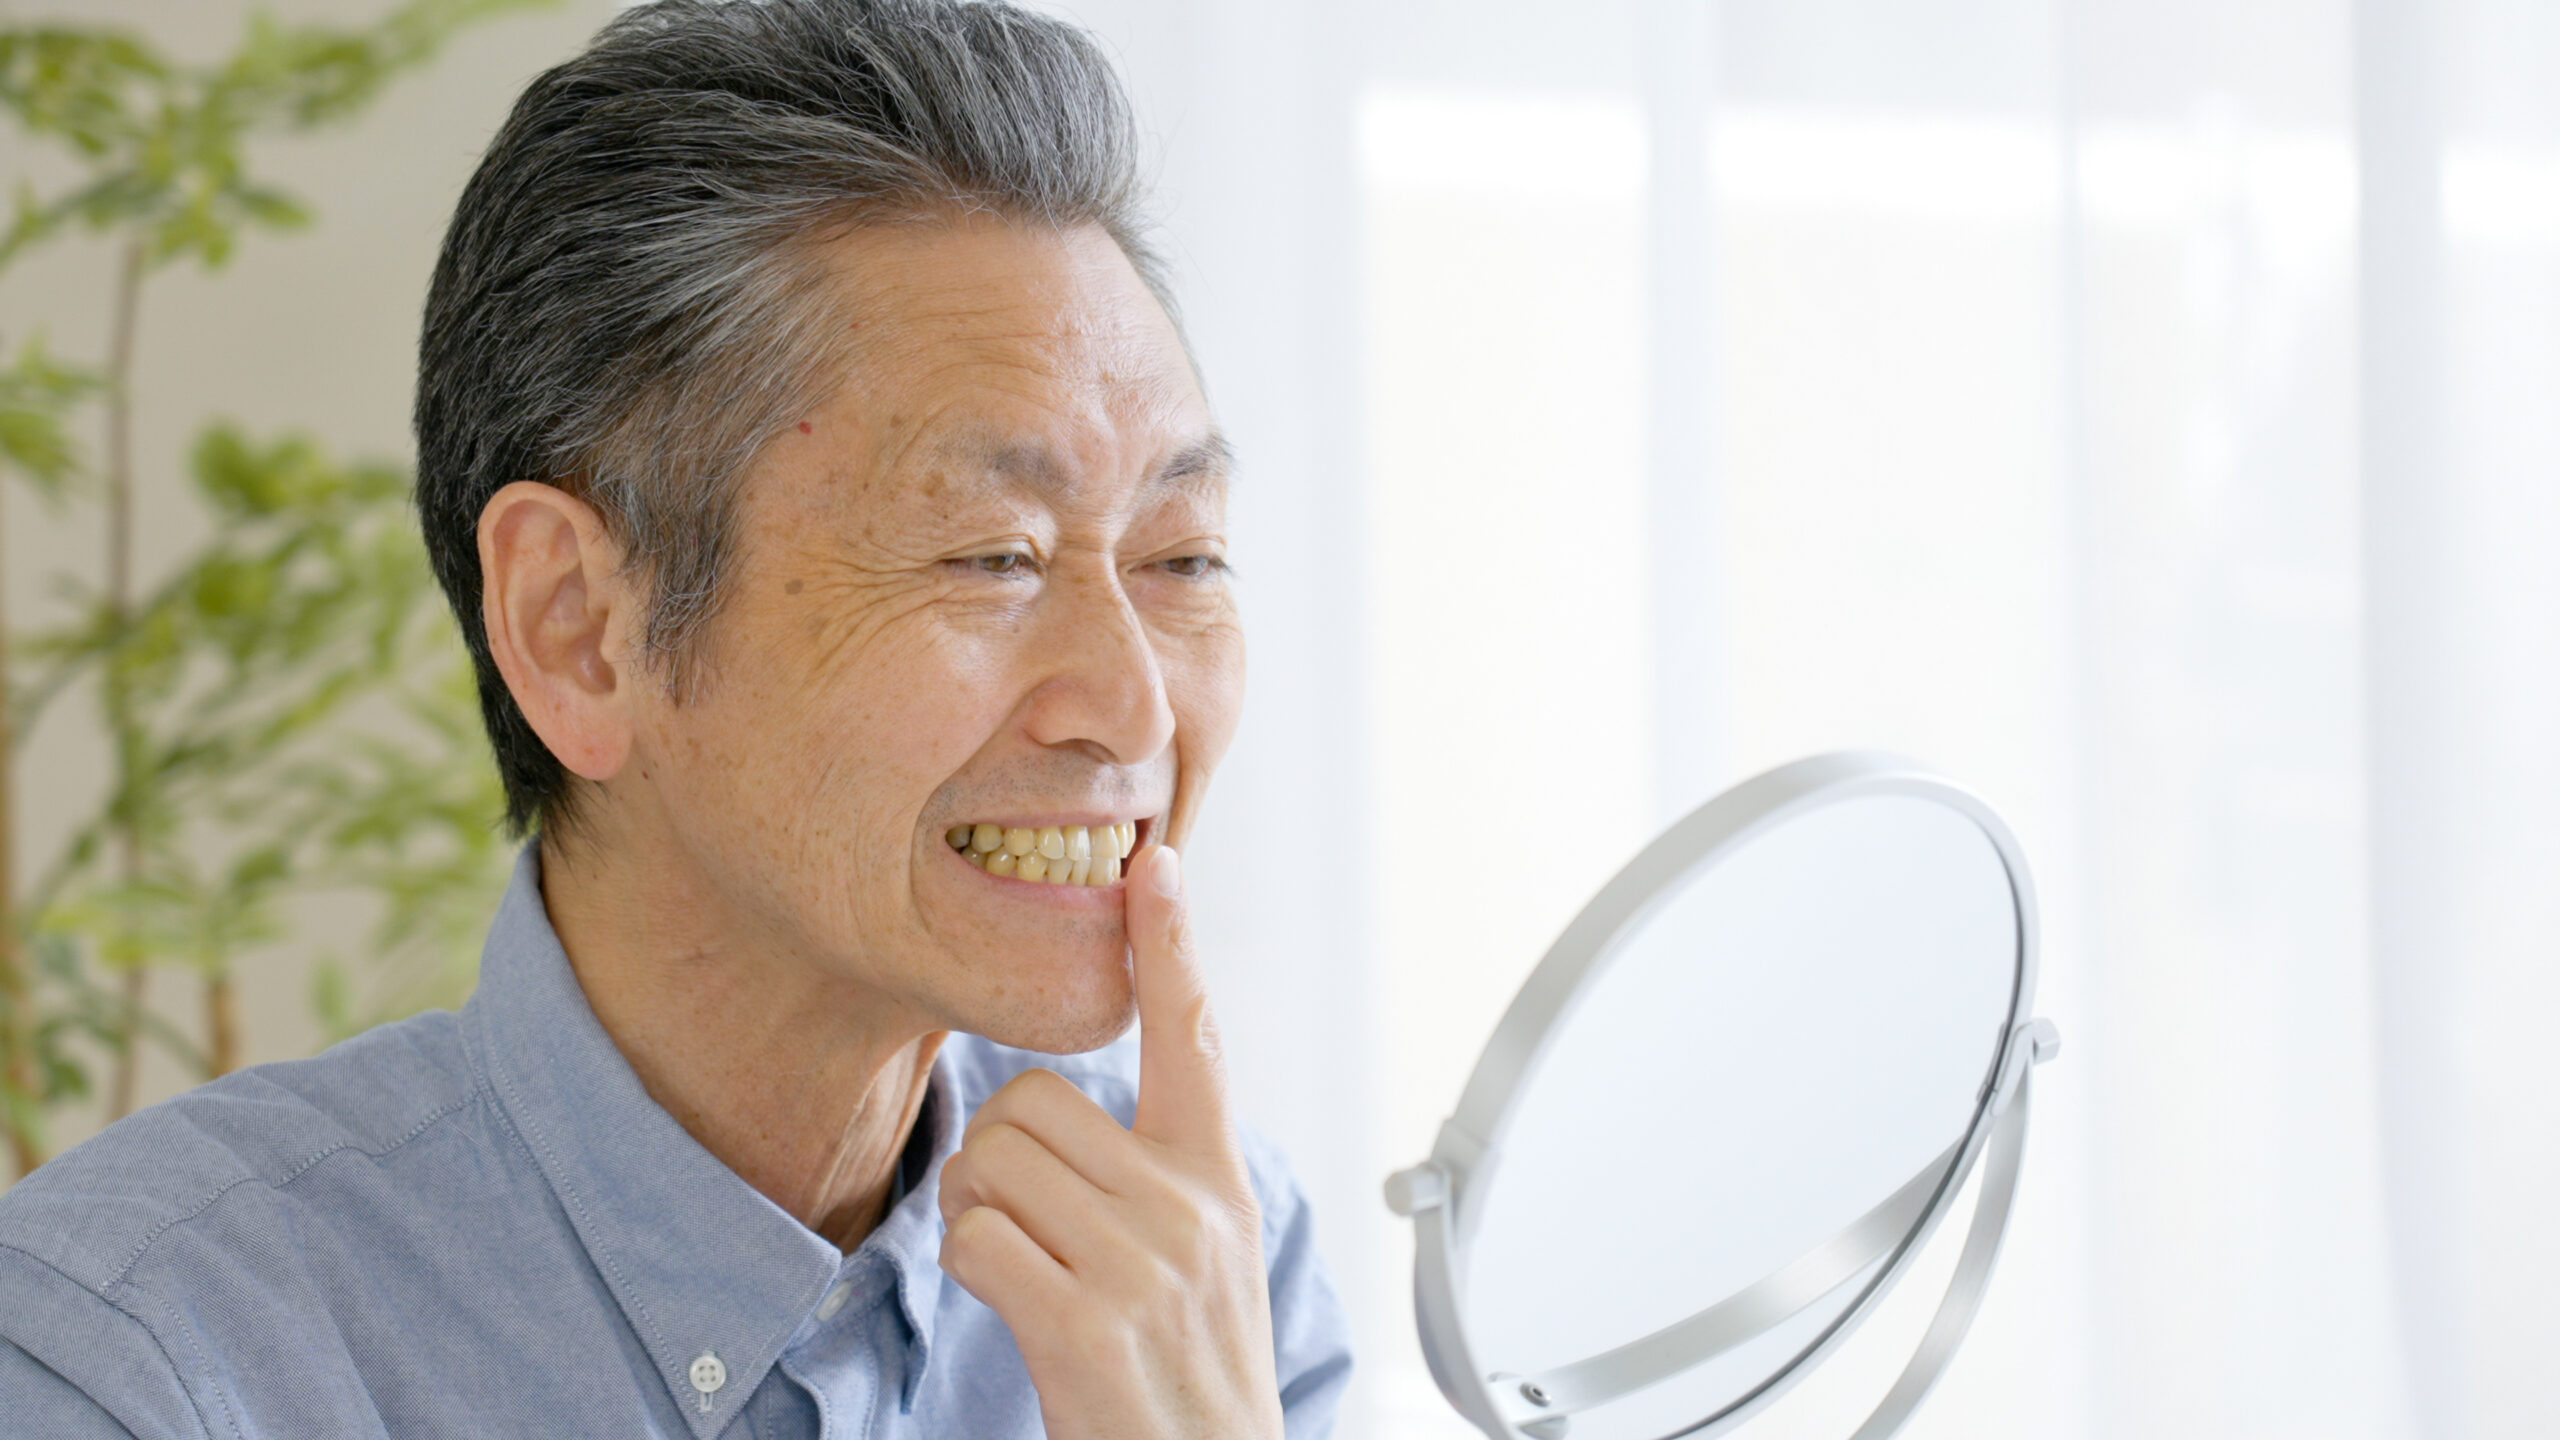 Comparing Dental Implants with Other Tooth Replacement Options: Bridges and Dentures